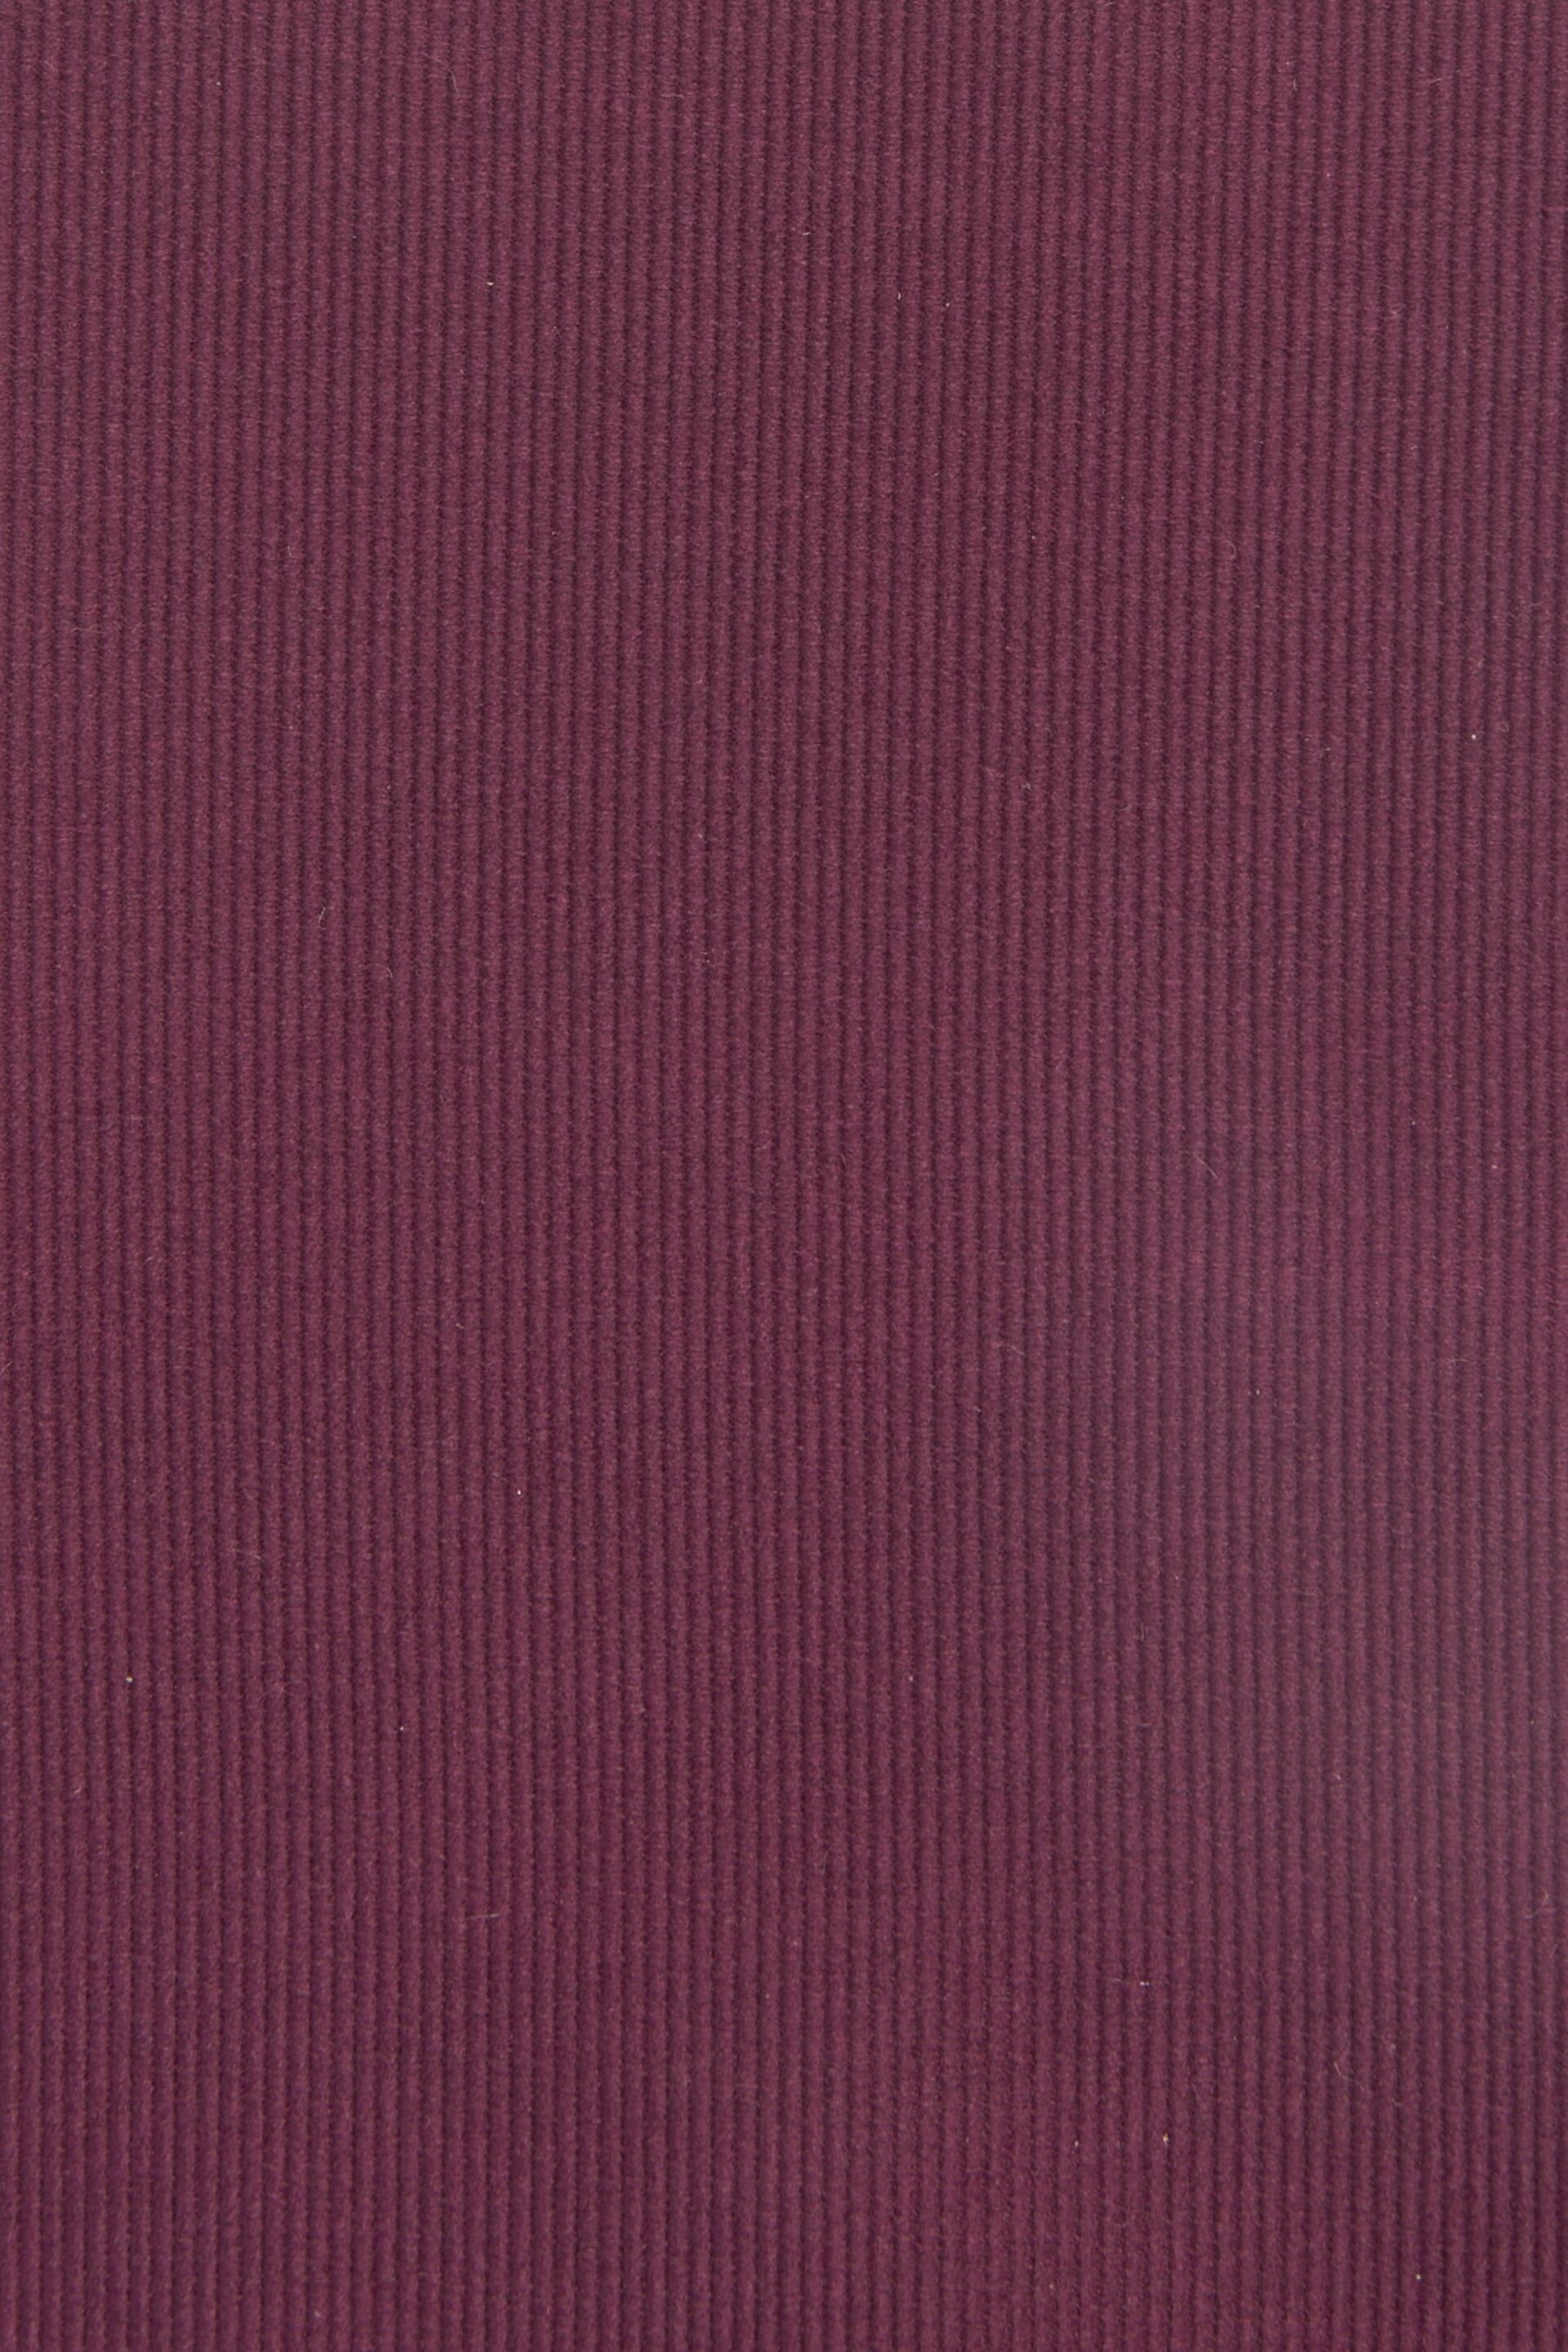 Burgundy Red Recycled Polyester Twill Pocket Square - Image 2 of 2